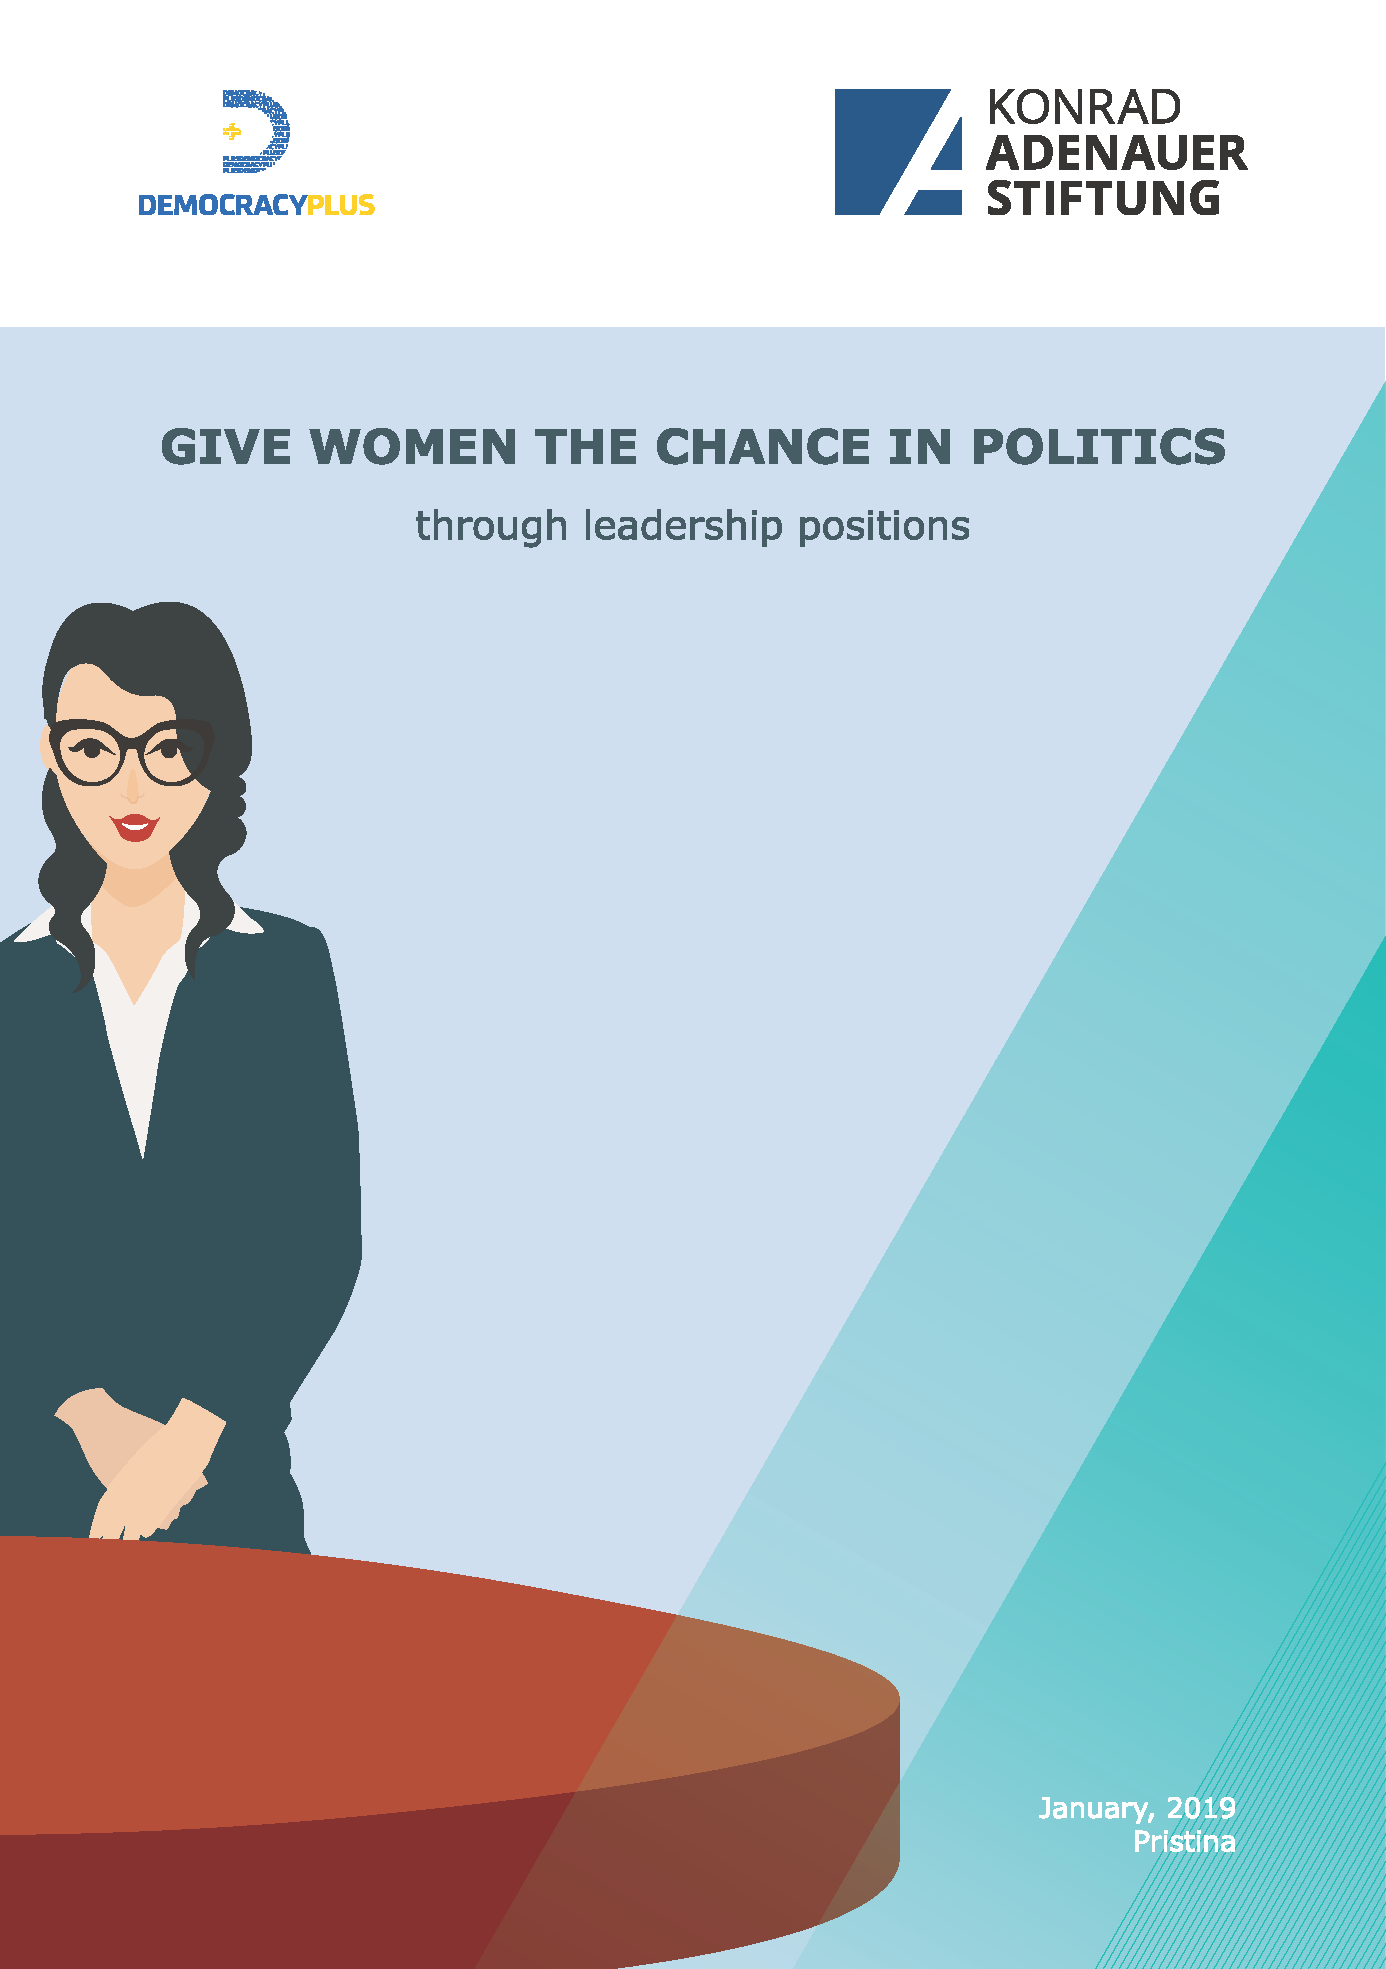 Give women the chance in politics through leadership positions